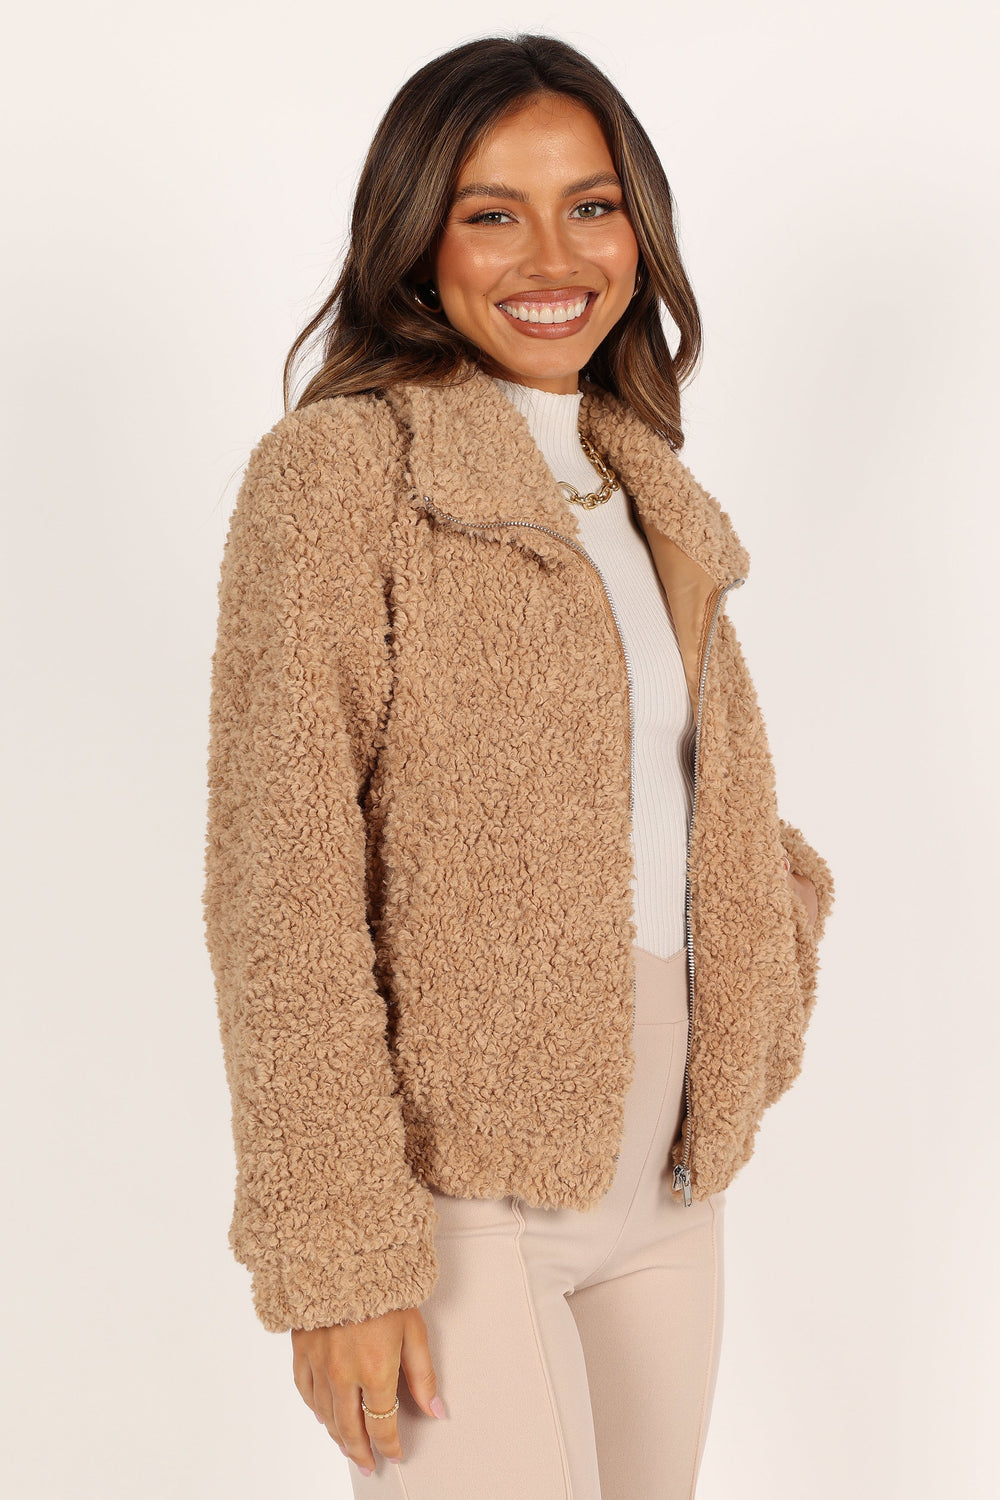 Petal and Pup USA OUTERWEAR Lucia Zip Front Teddy Jacket - Camel